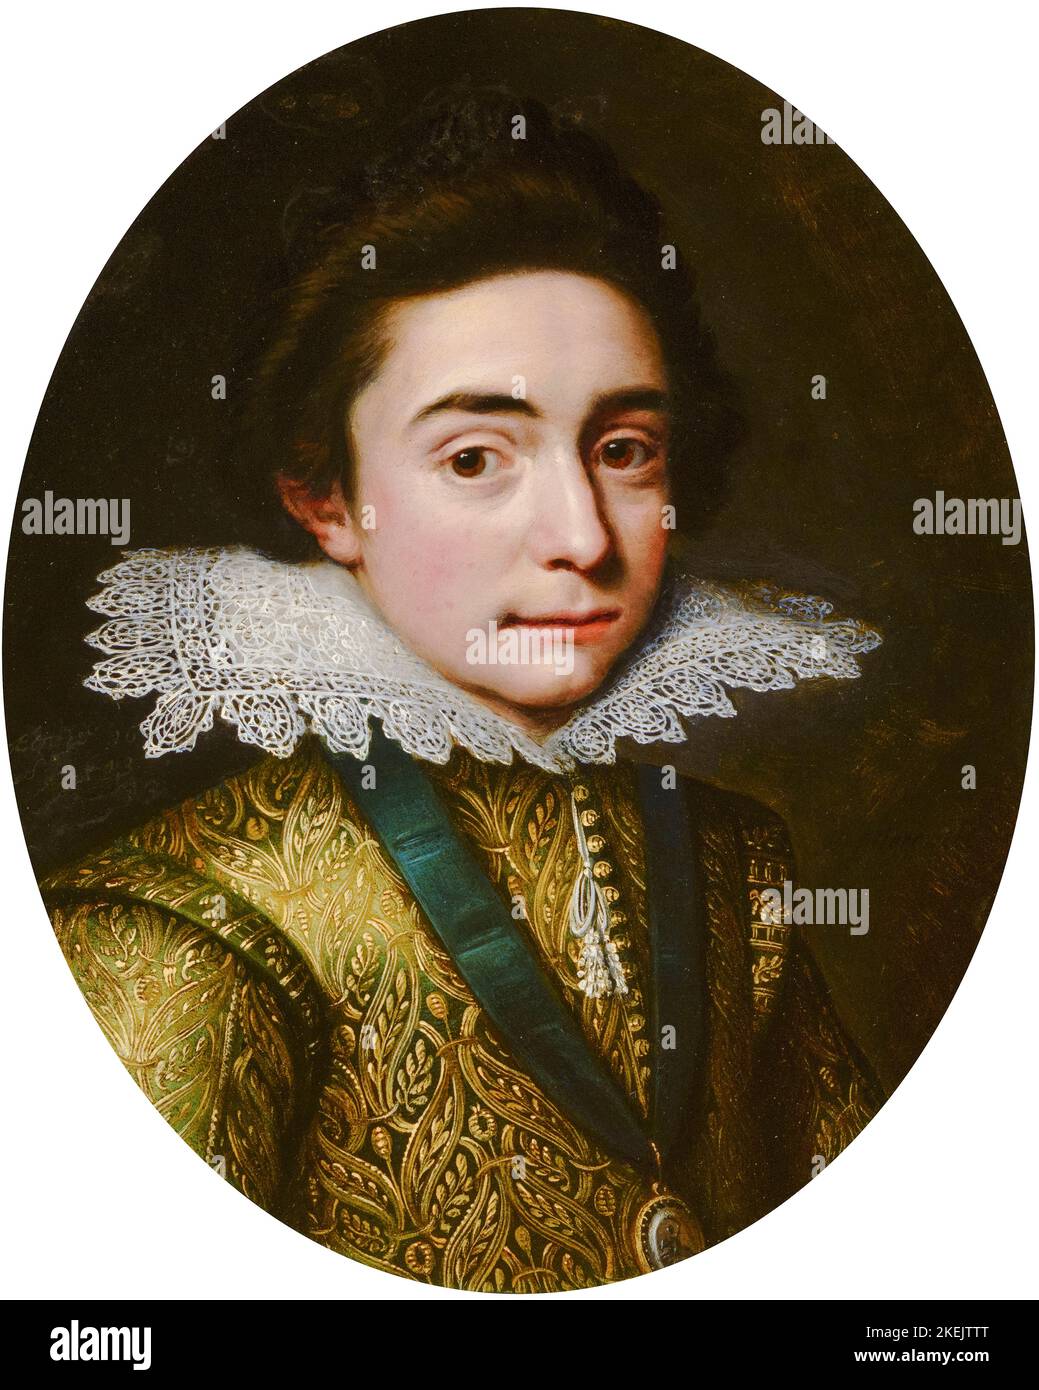 Friedrich V (1596-1632), Elector Palatine and King of Bohemia, portrait painting in oil on copper by Michiel Jansz. van Mierevelt, 1613 Stock Photo